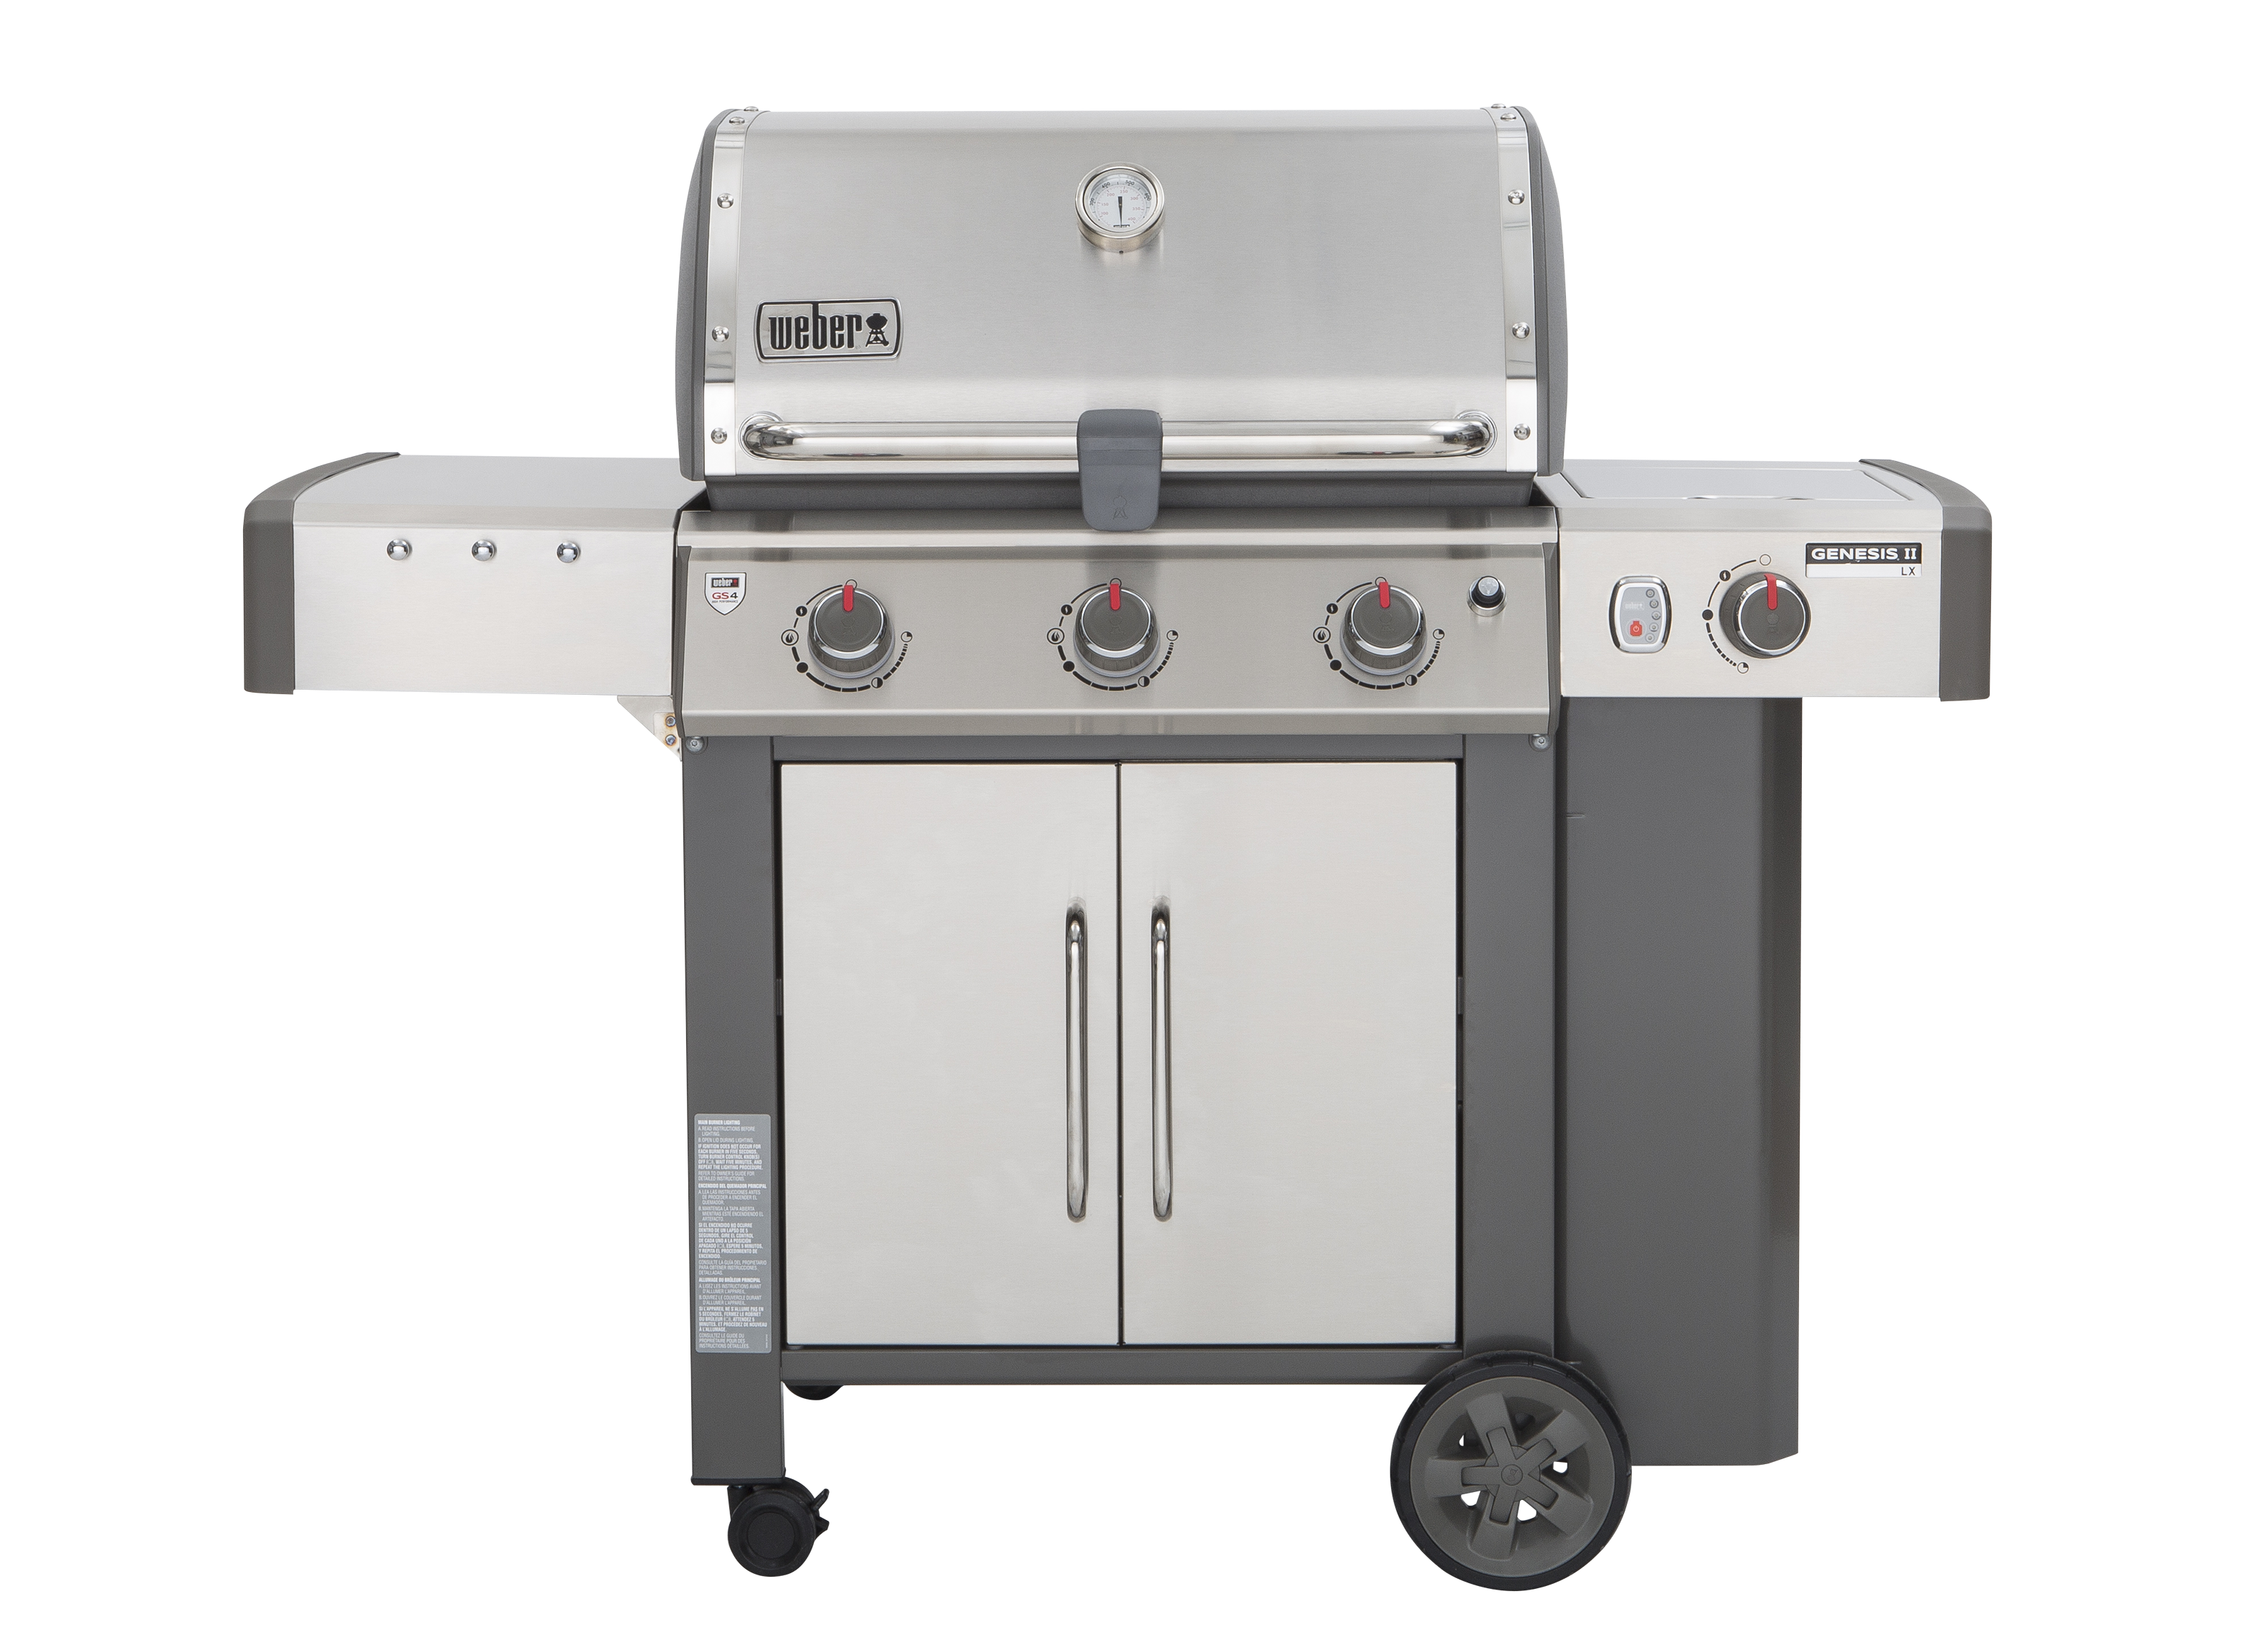 Weber Genesis II LX S-340 Grill Review Consumer Reports